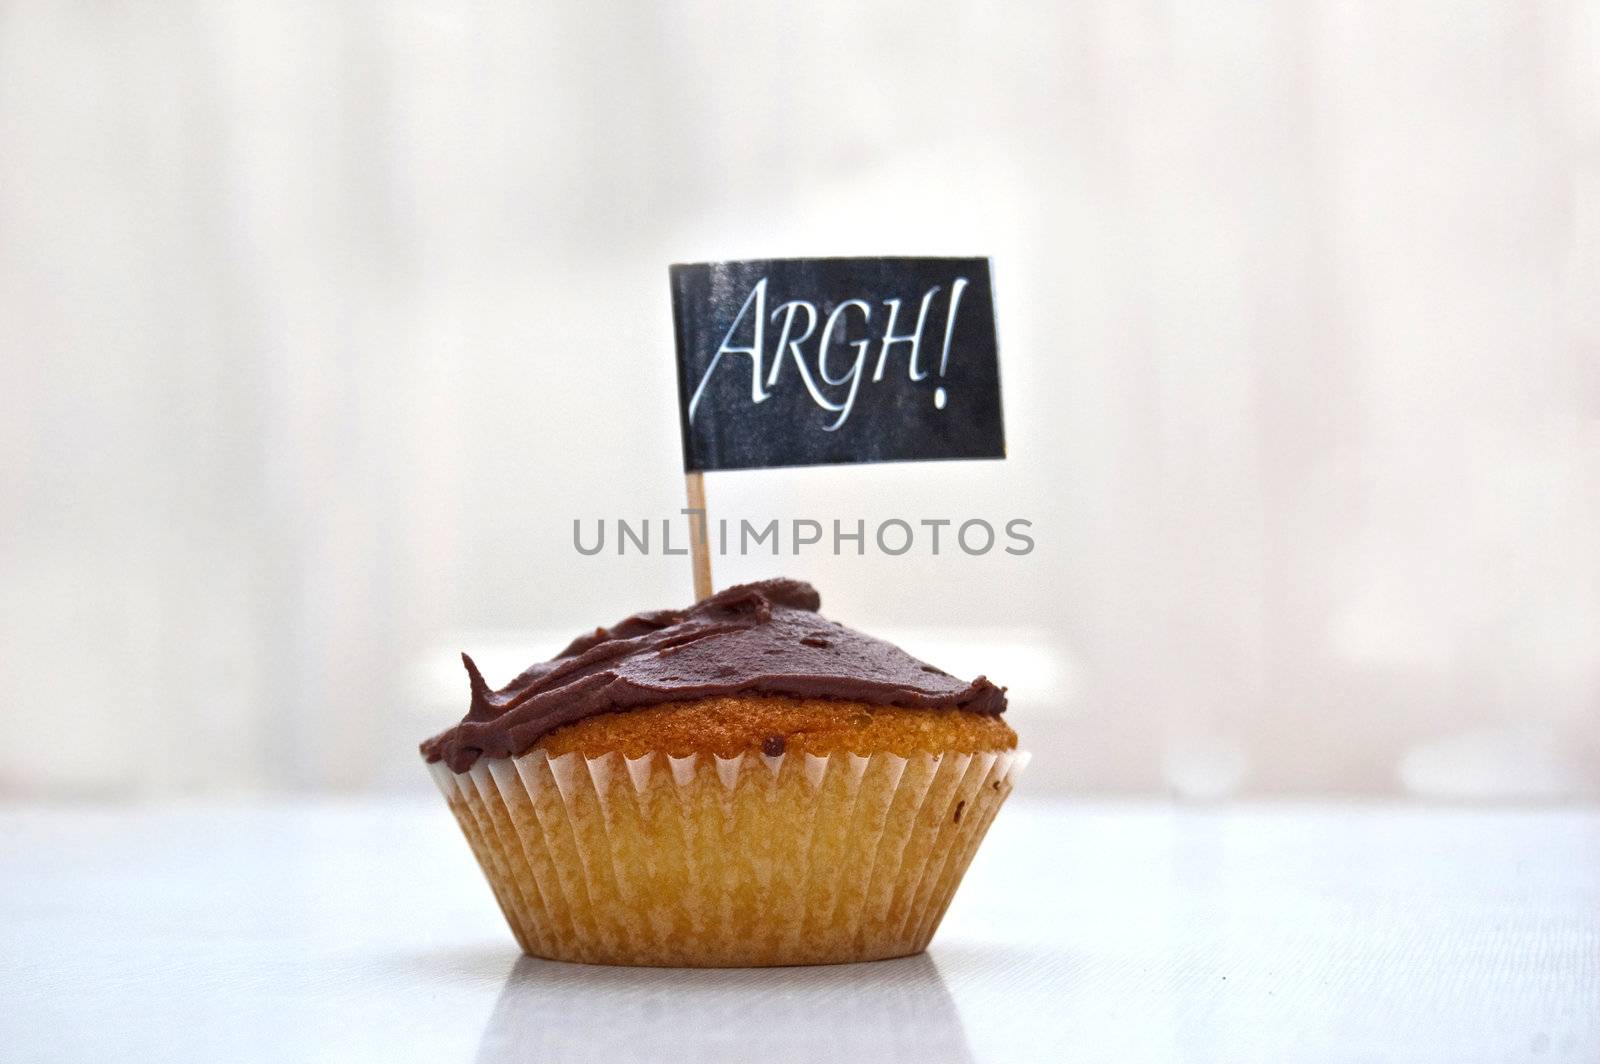 an image of a party cup-cake with a flag saying argh! over white with copyspace.